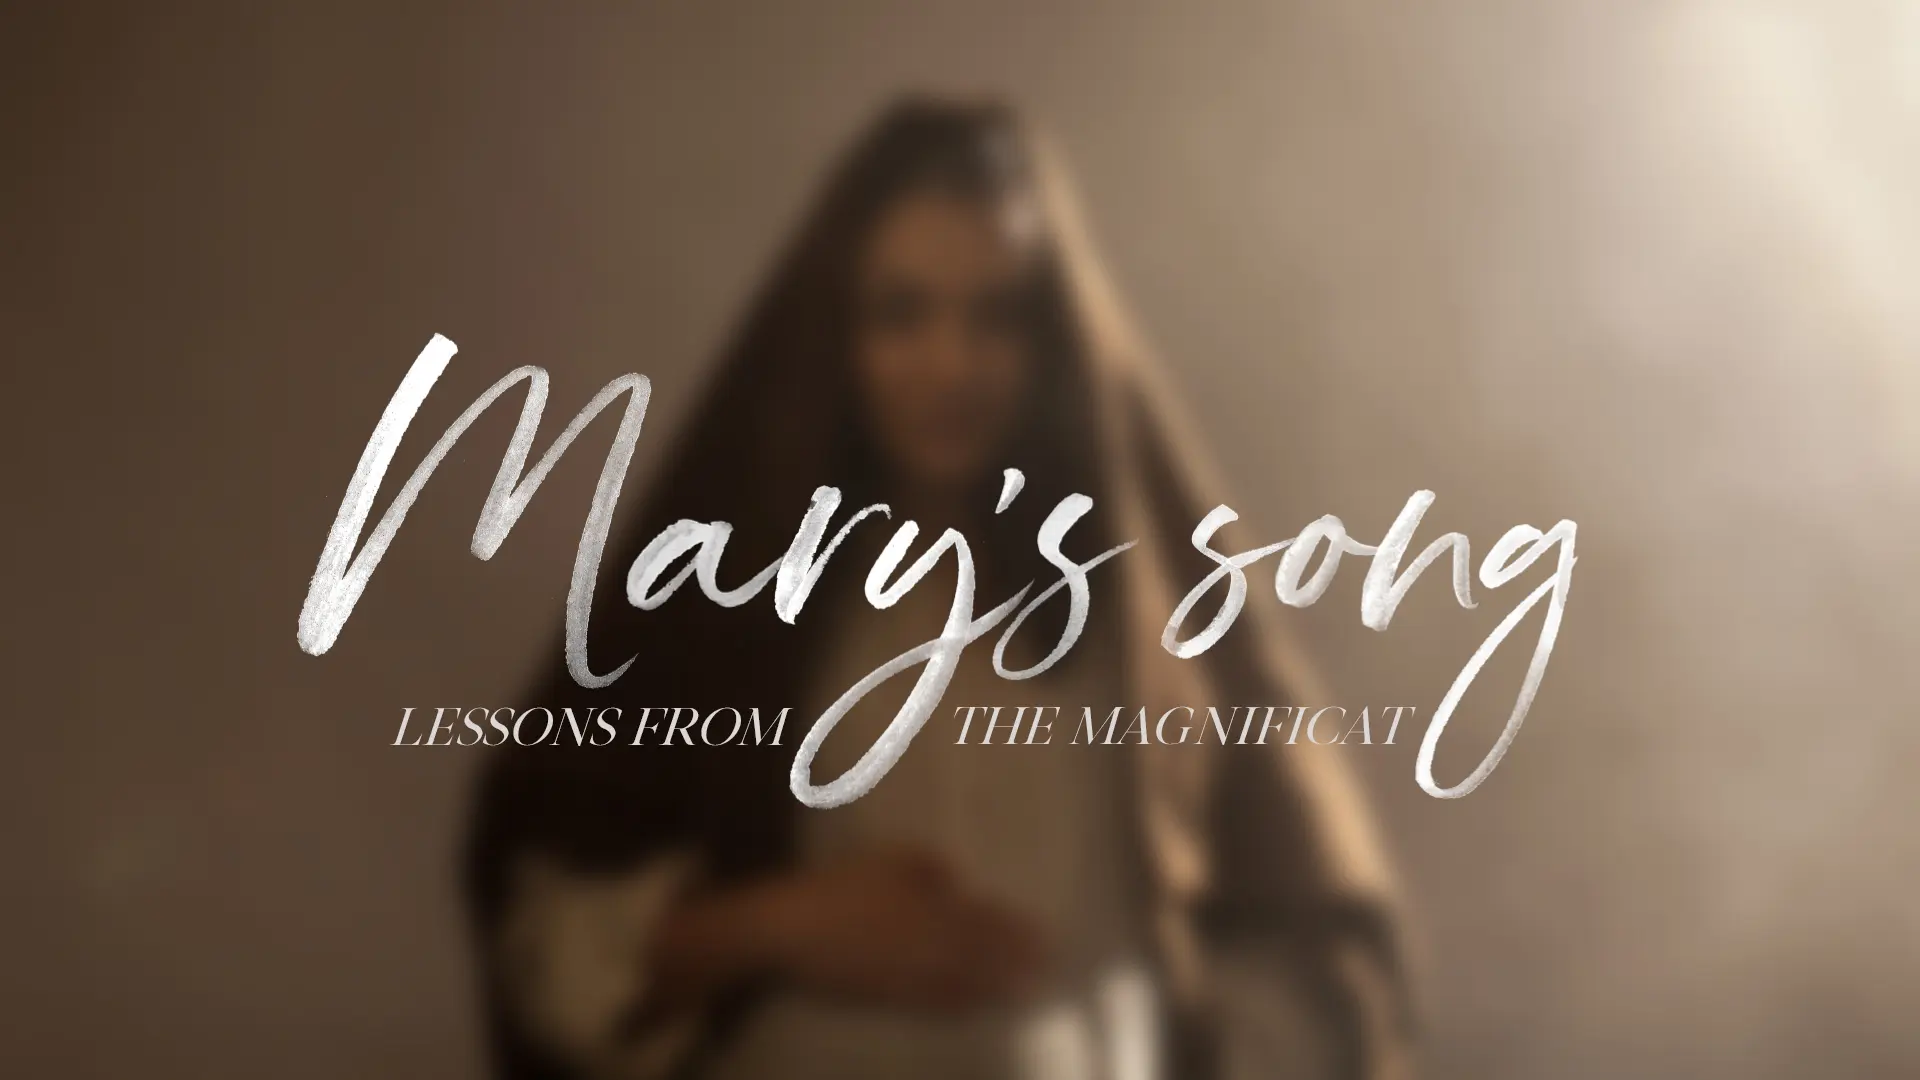 Featured image for “Mary’s Song”